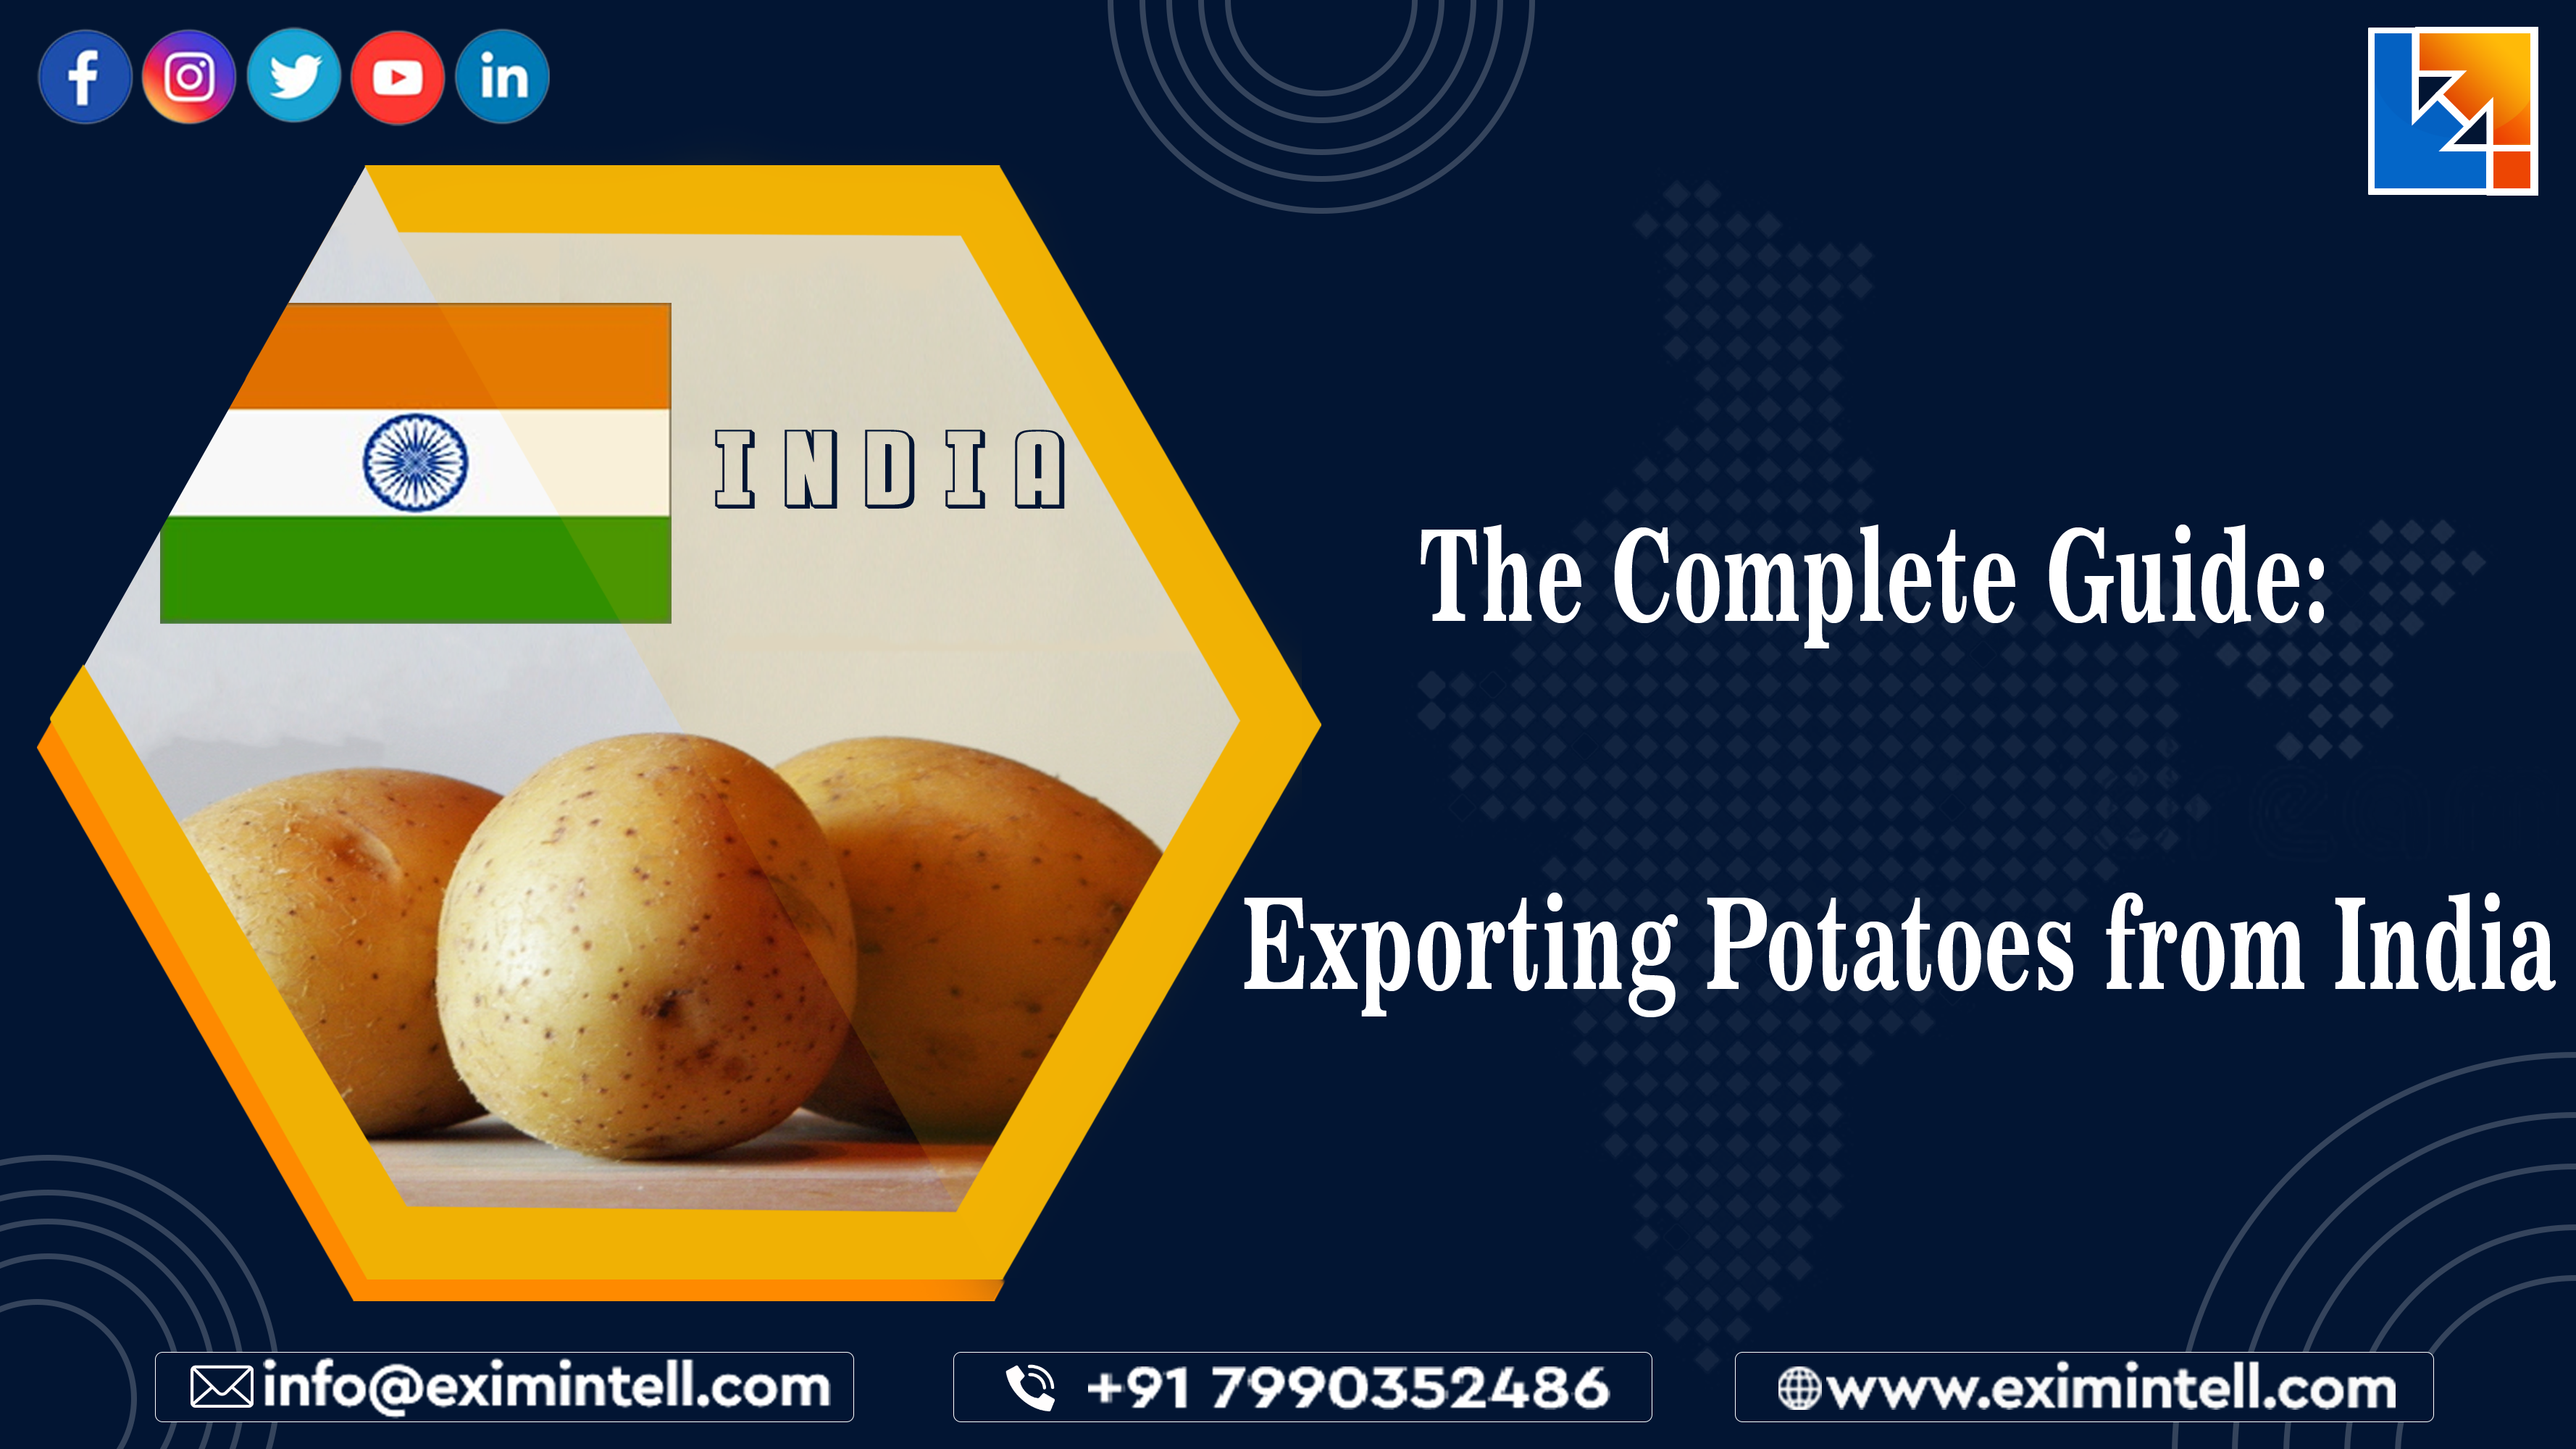 The Complete Guide to Exporting Potatoes from India